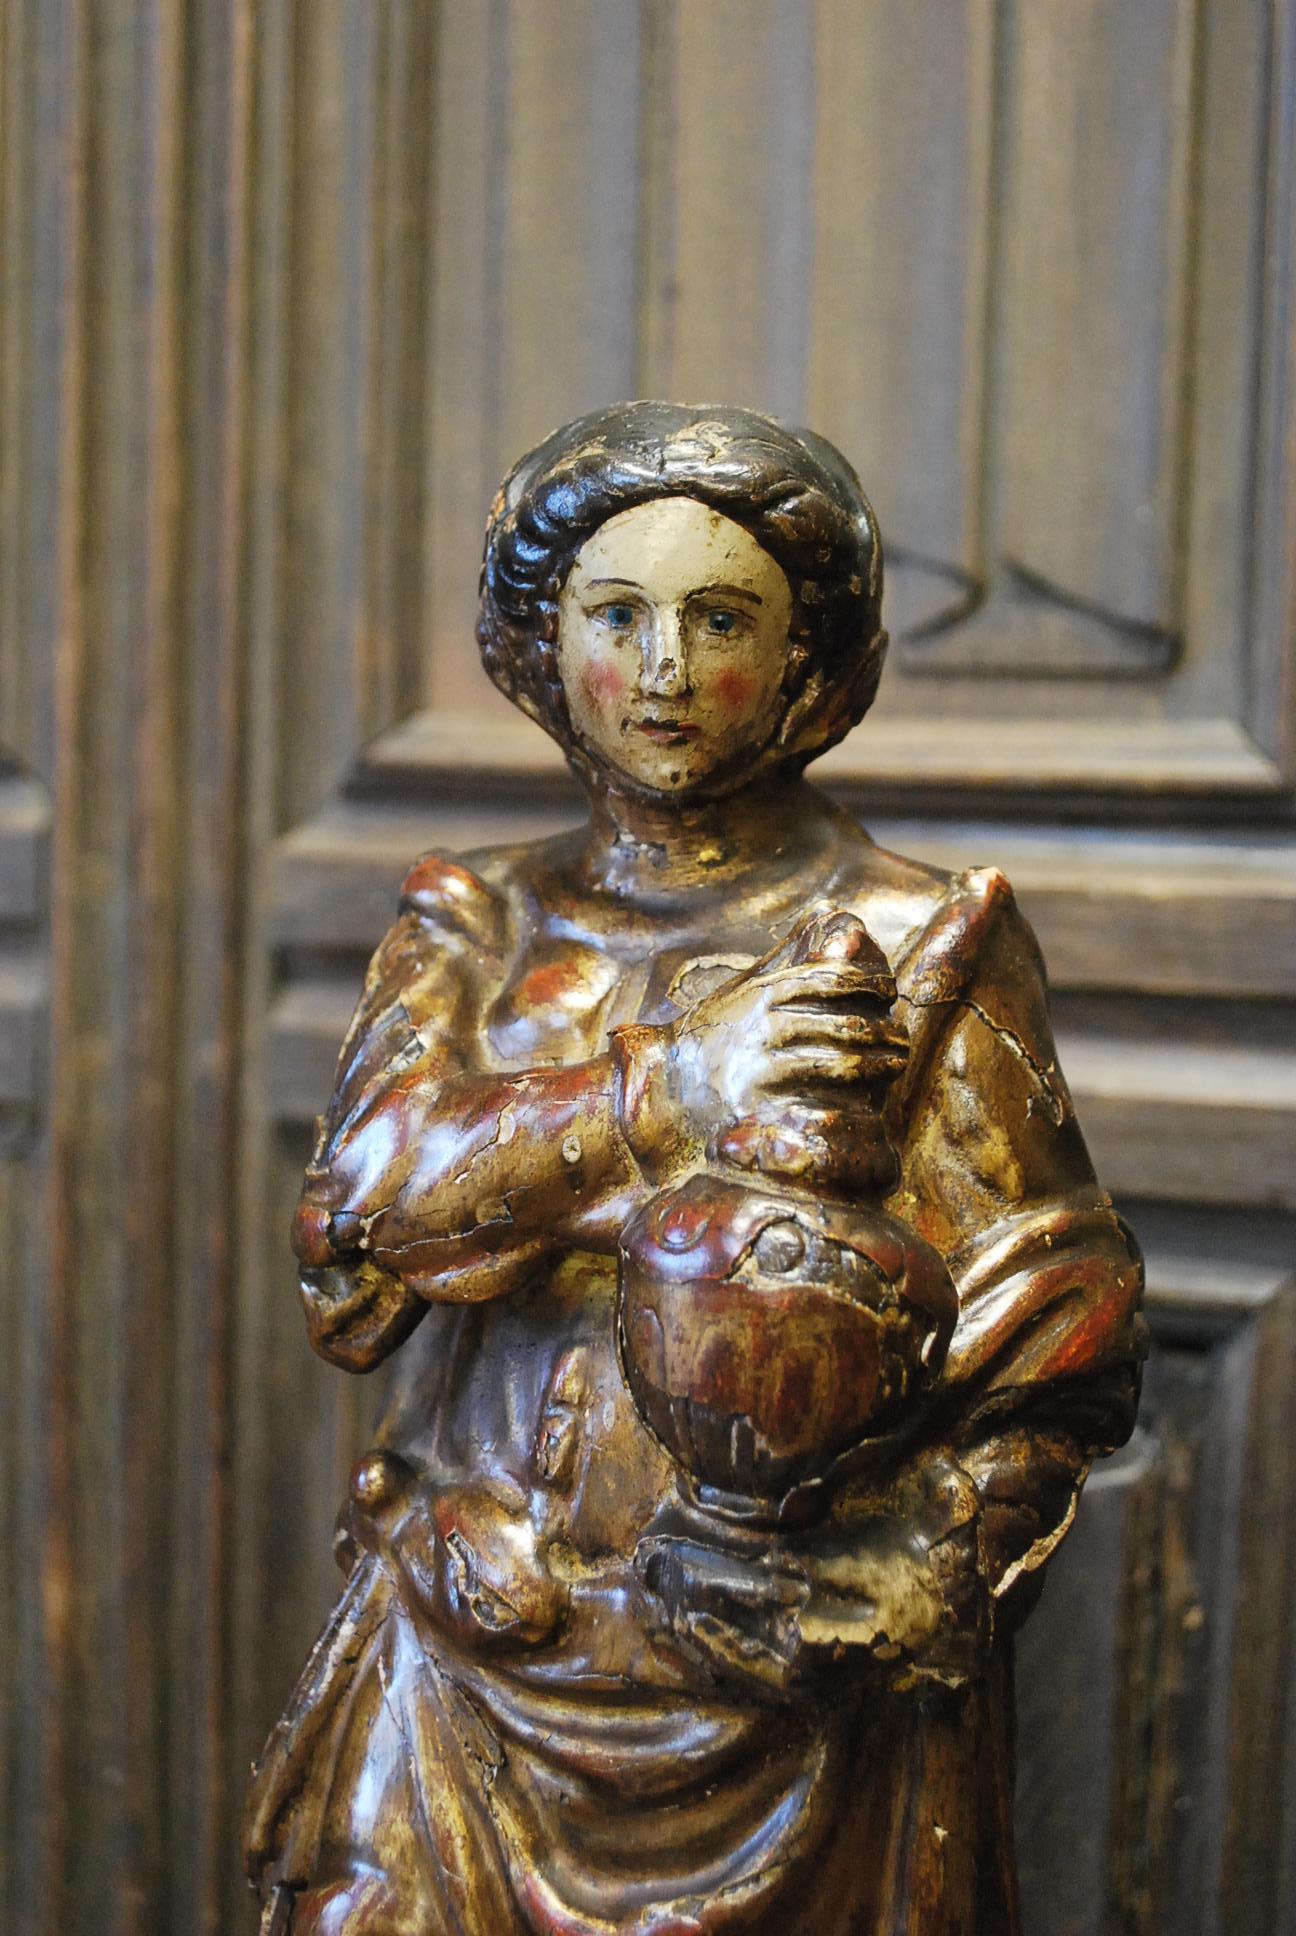 Hutton-Clarke Antiques is delighted to present an exquisite Antique Carved Walnut Polychrome Figure of Saint Madeleine. This beautiful piece, bearing the likeness of Saint Madeleine Sophie Barat (12 December 1779 – 25 May 1865), is a testament to